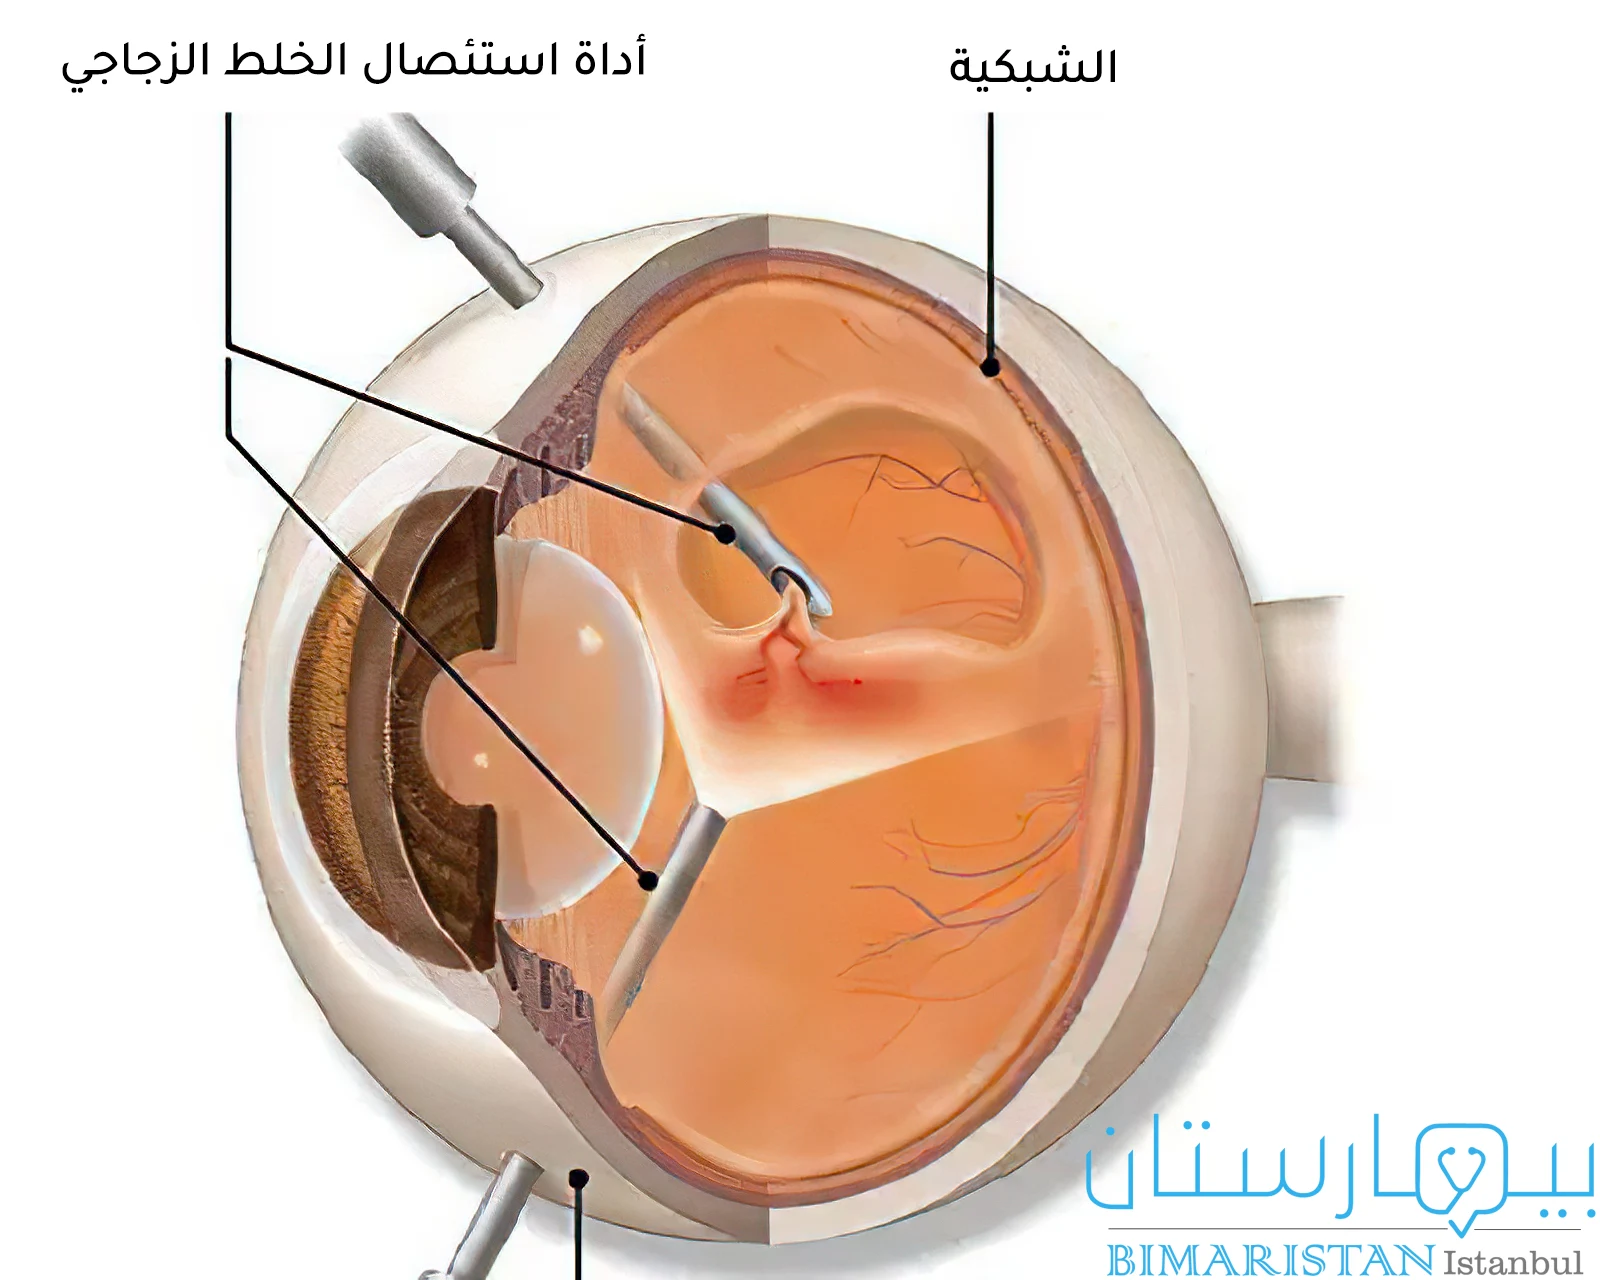 Image showing the treatment of retinal detachment through vitrectomy